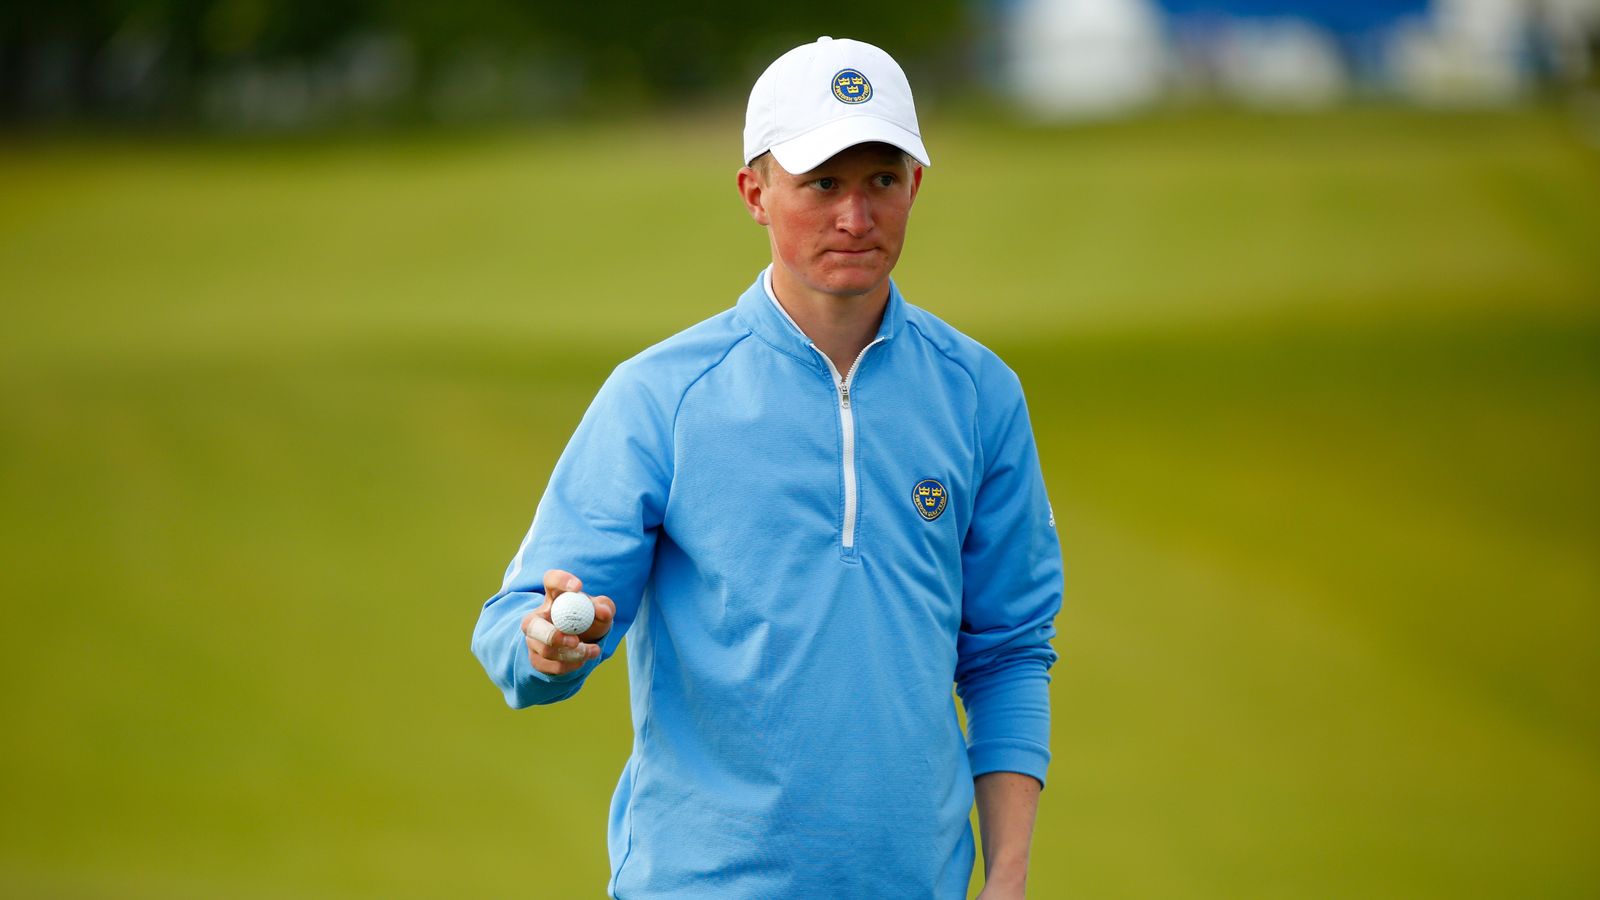 Teenage Amateur Tied For Lead At Nordea Masters Golf News Sky Sports 8716